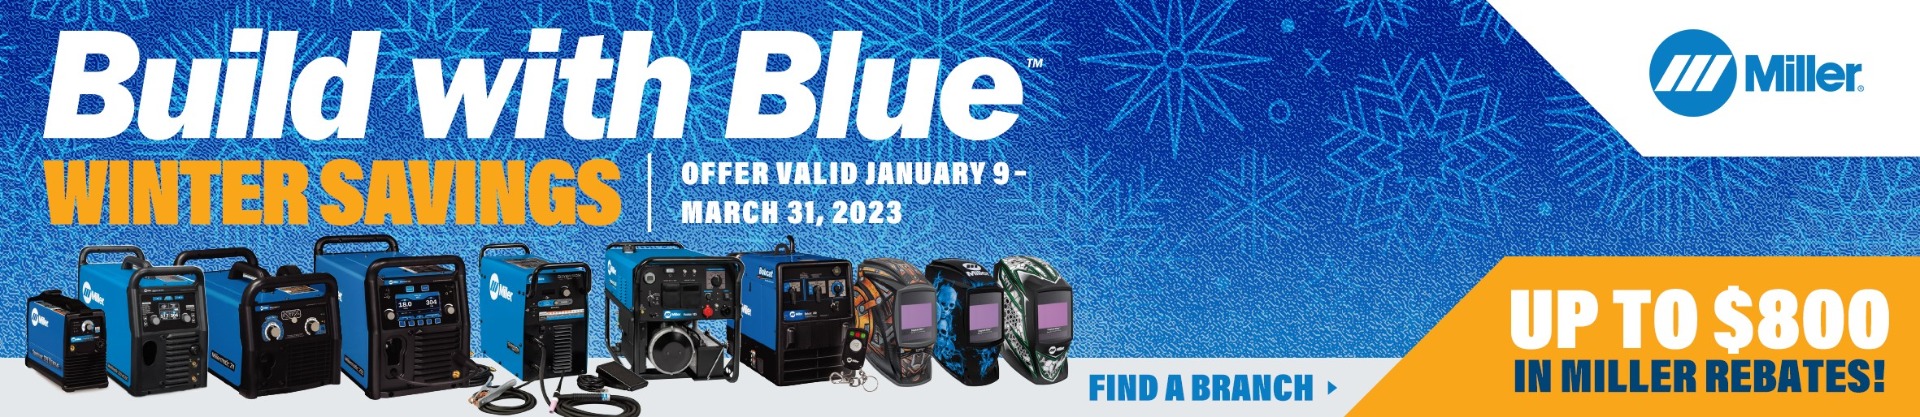 Miller Build with Blue Winter Savings Promotion!